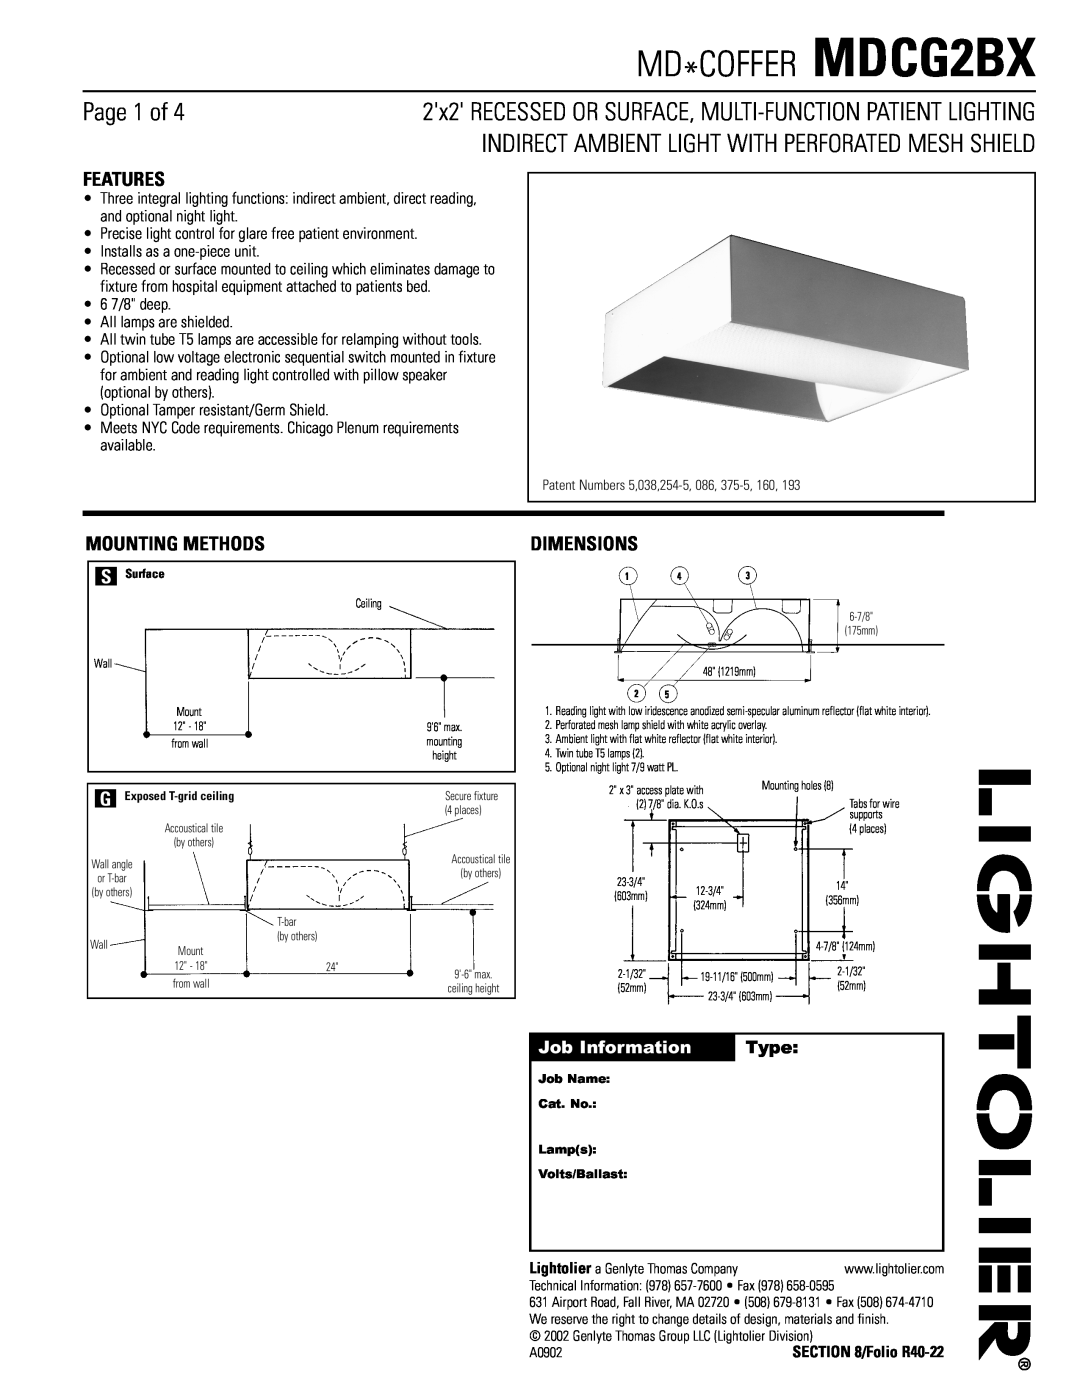 Lightolier dimensions MD*COFFER MDCG2BX, Page 1 of, Features, Mounting Methods, Dimensions, Job Information, Type 